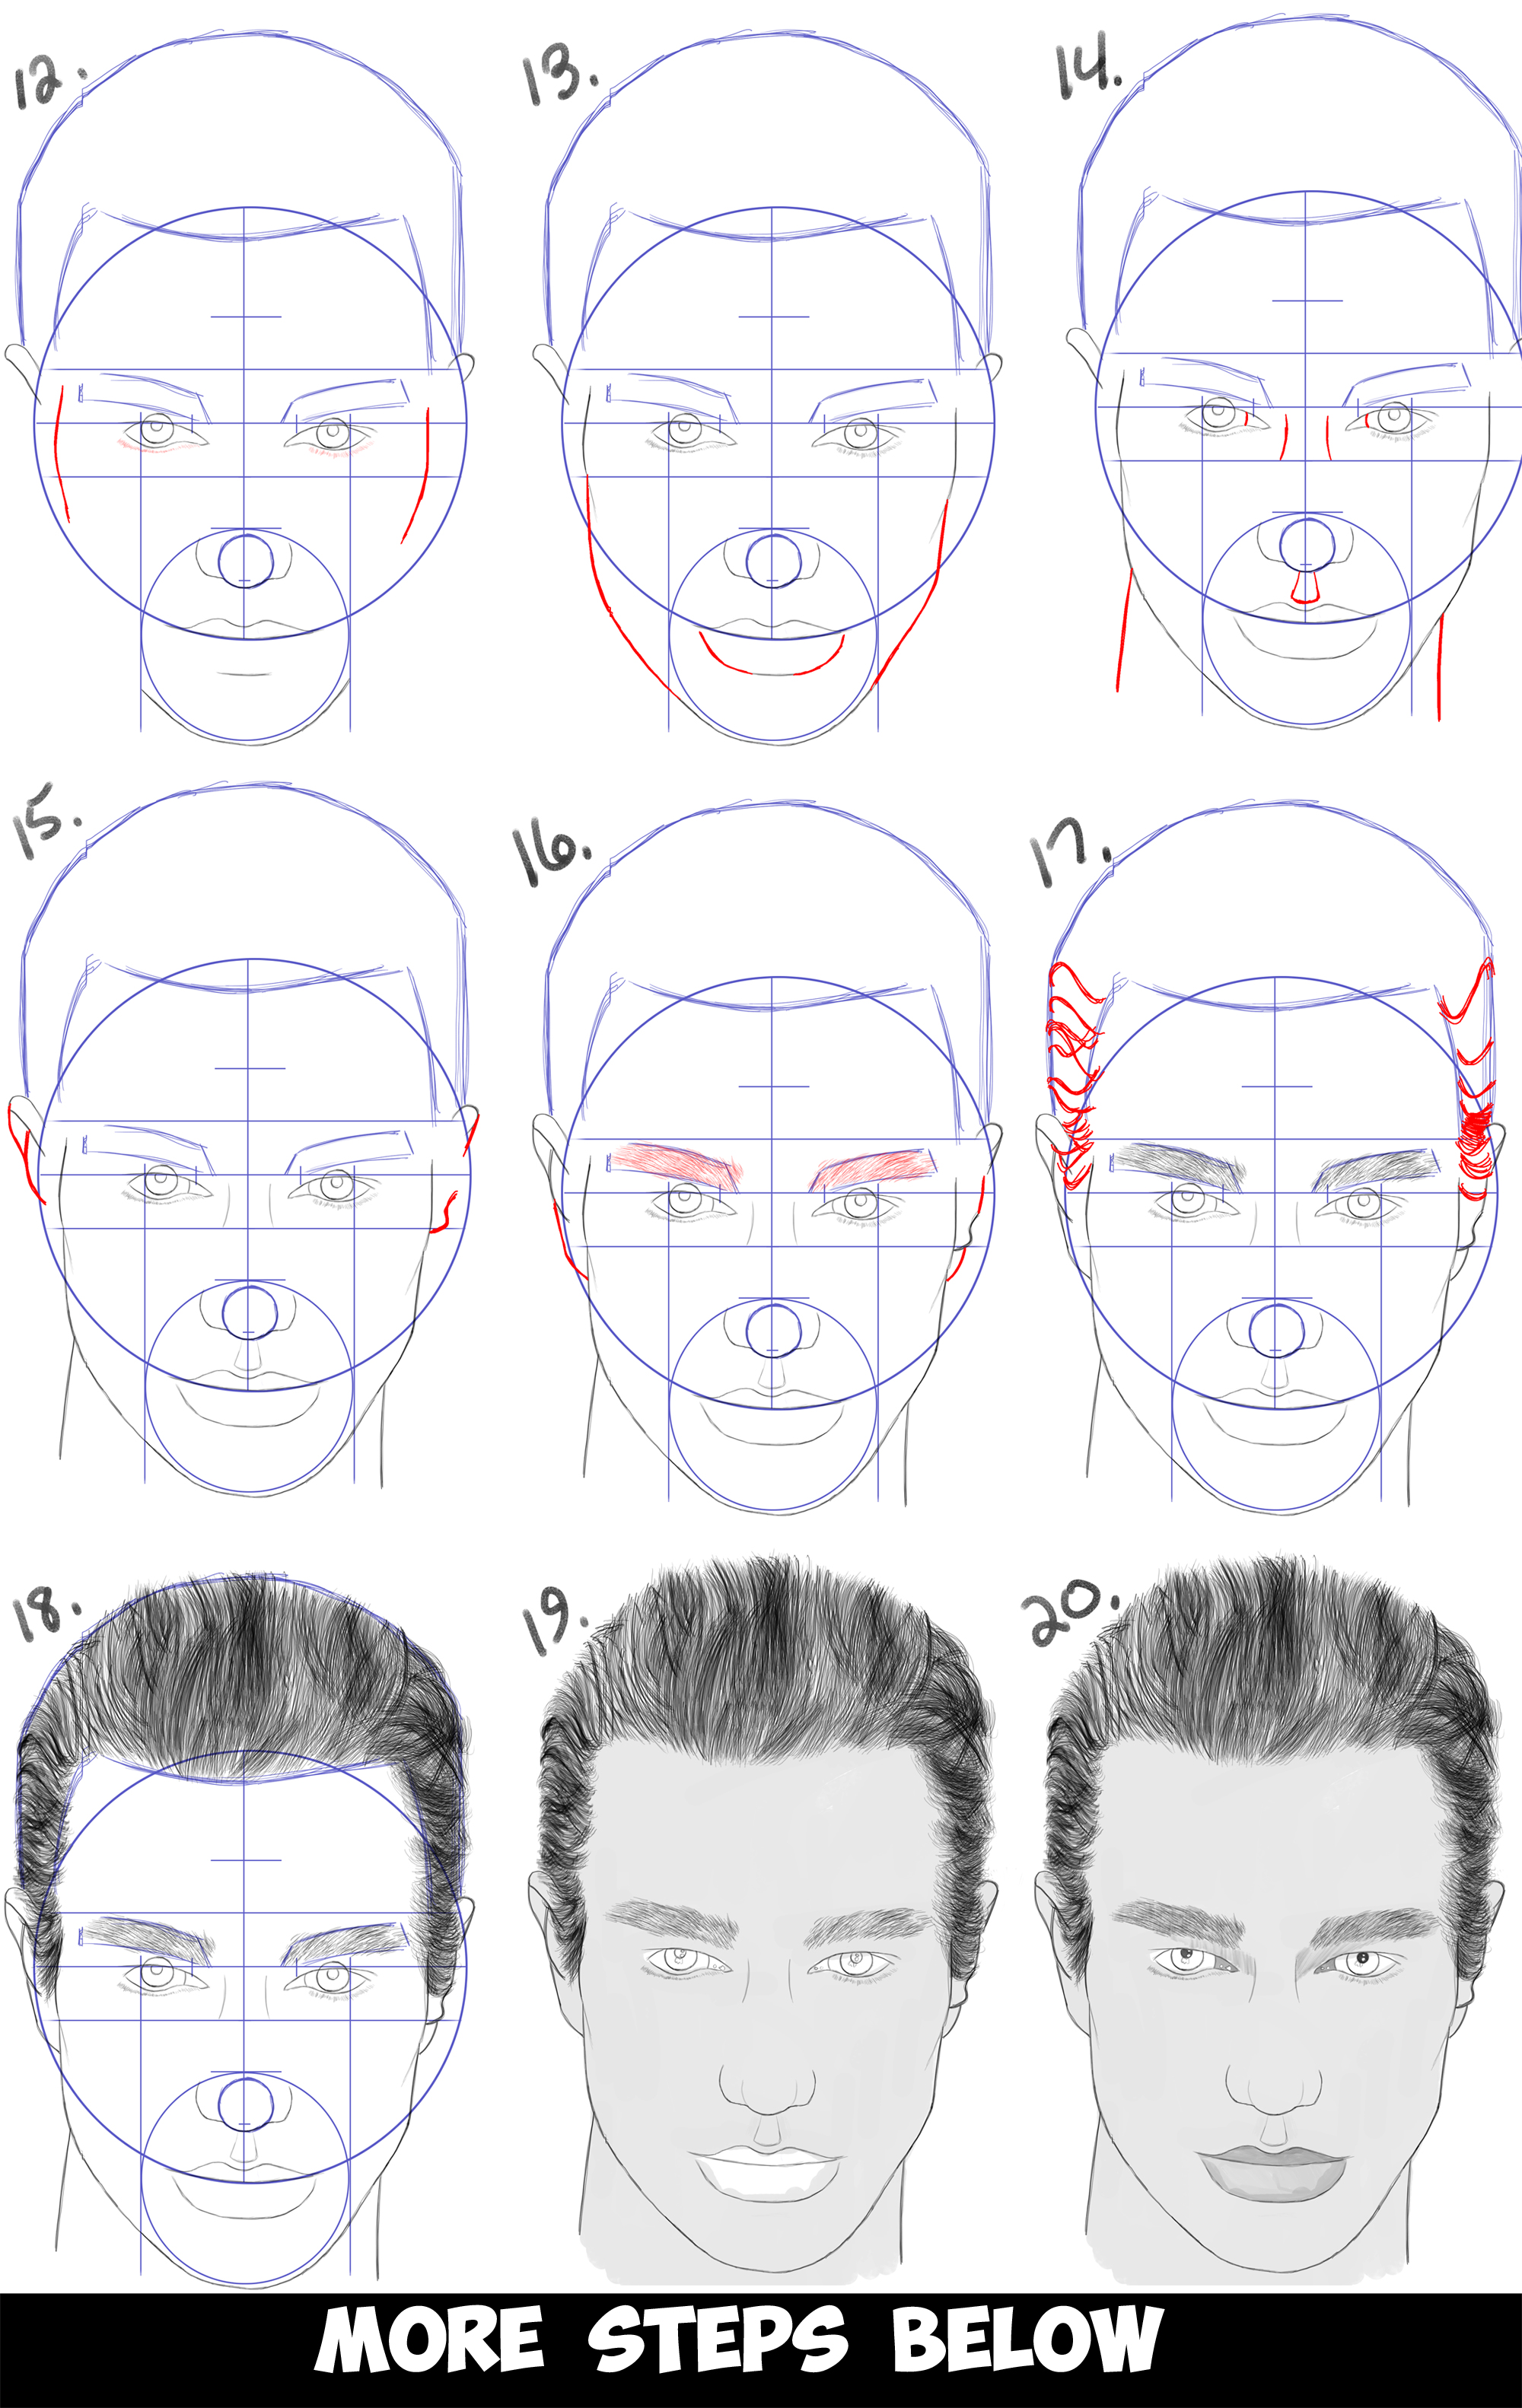 Learn How to Draw a Handsome Man's Face from the Front View (Male) Simple Steps Drawing Lesson for Beginners